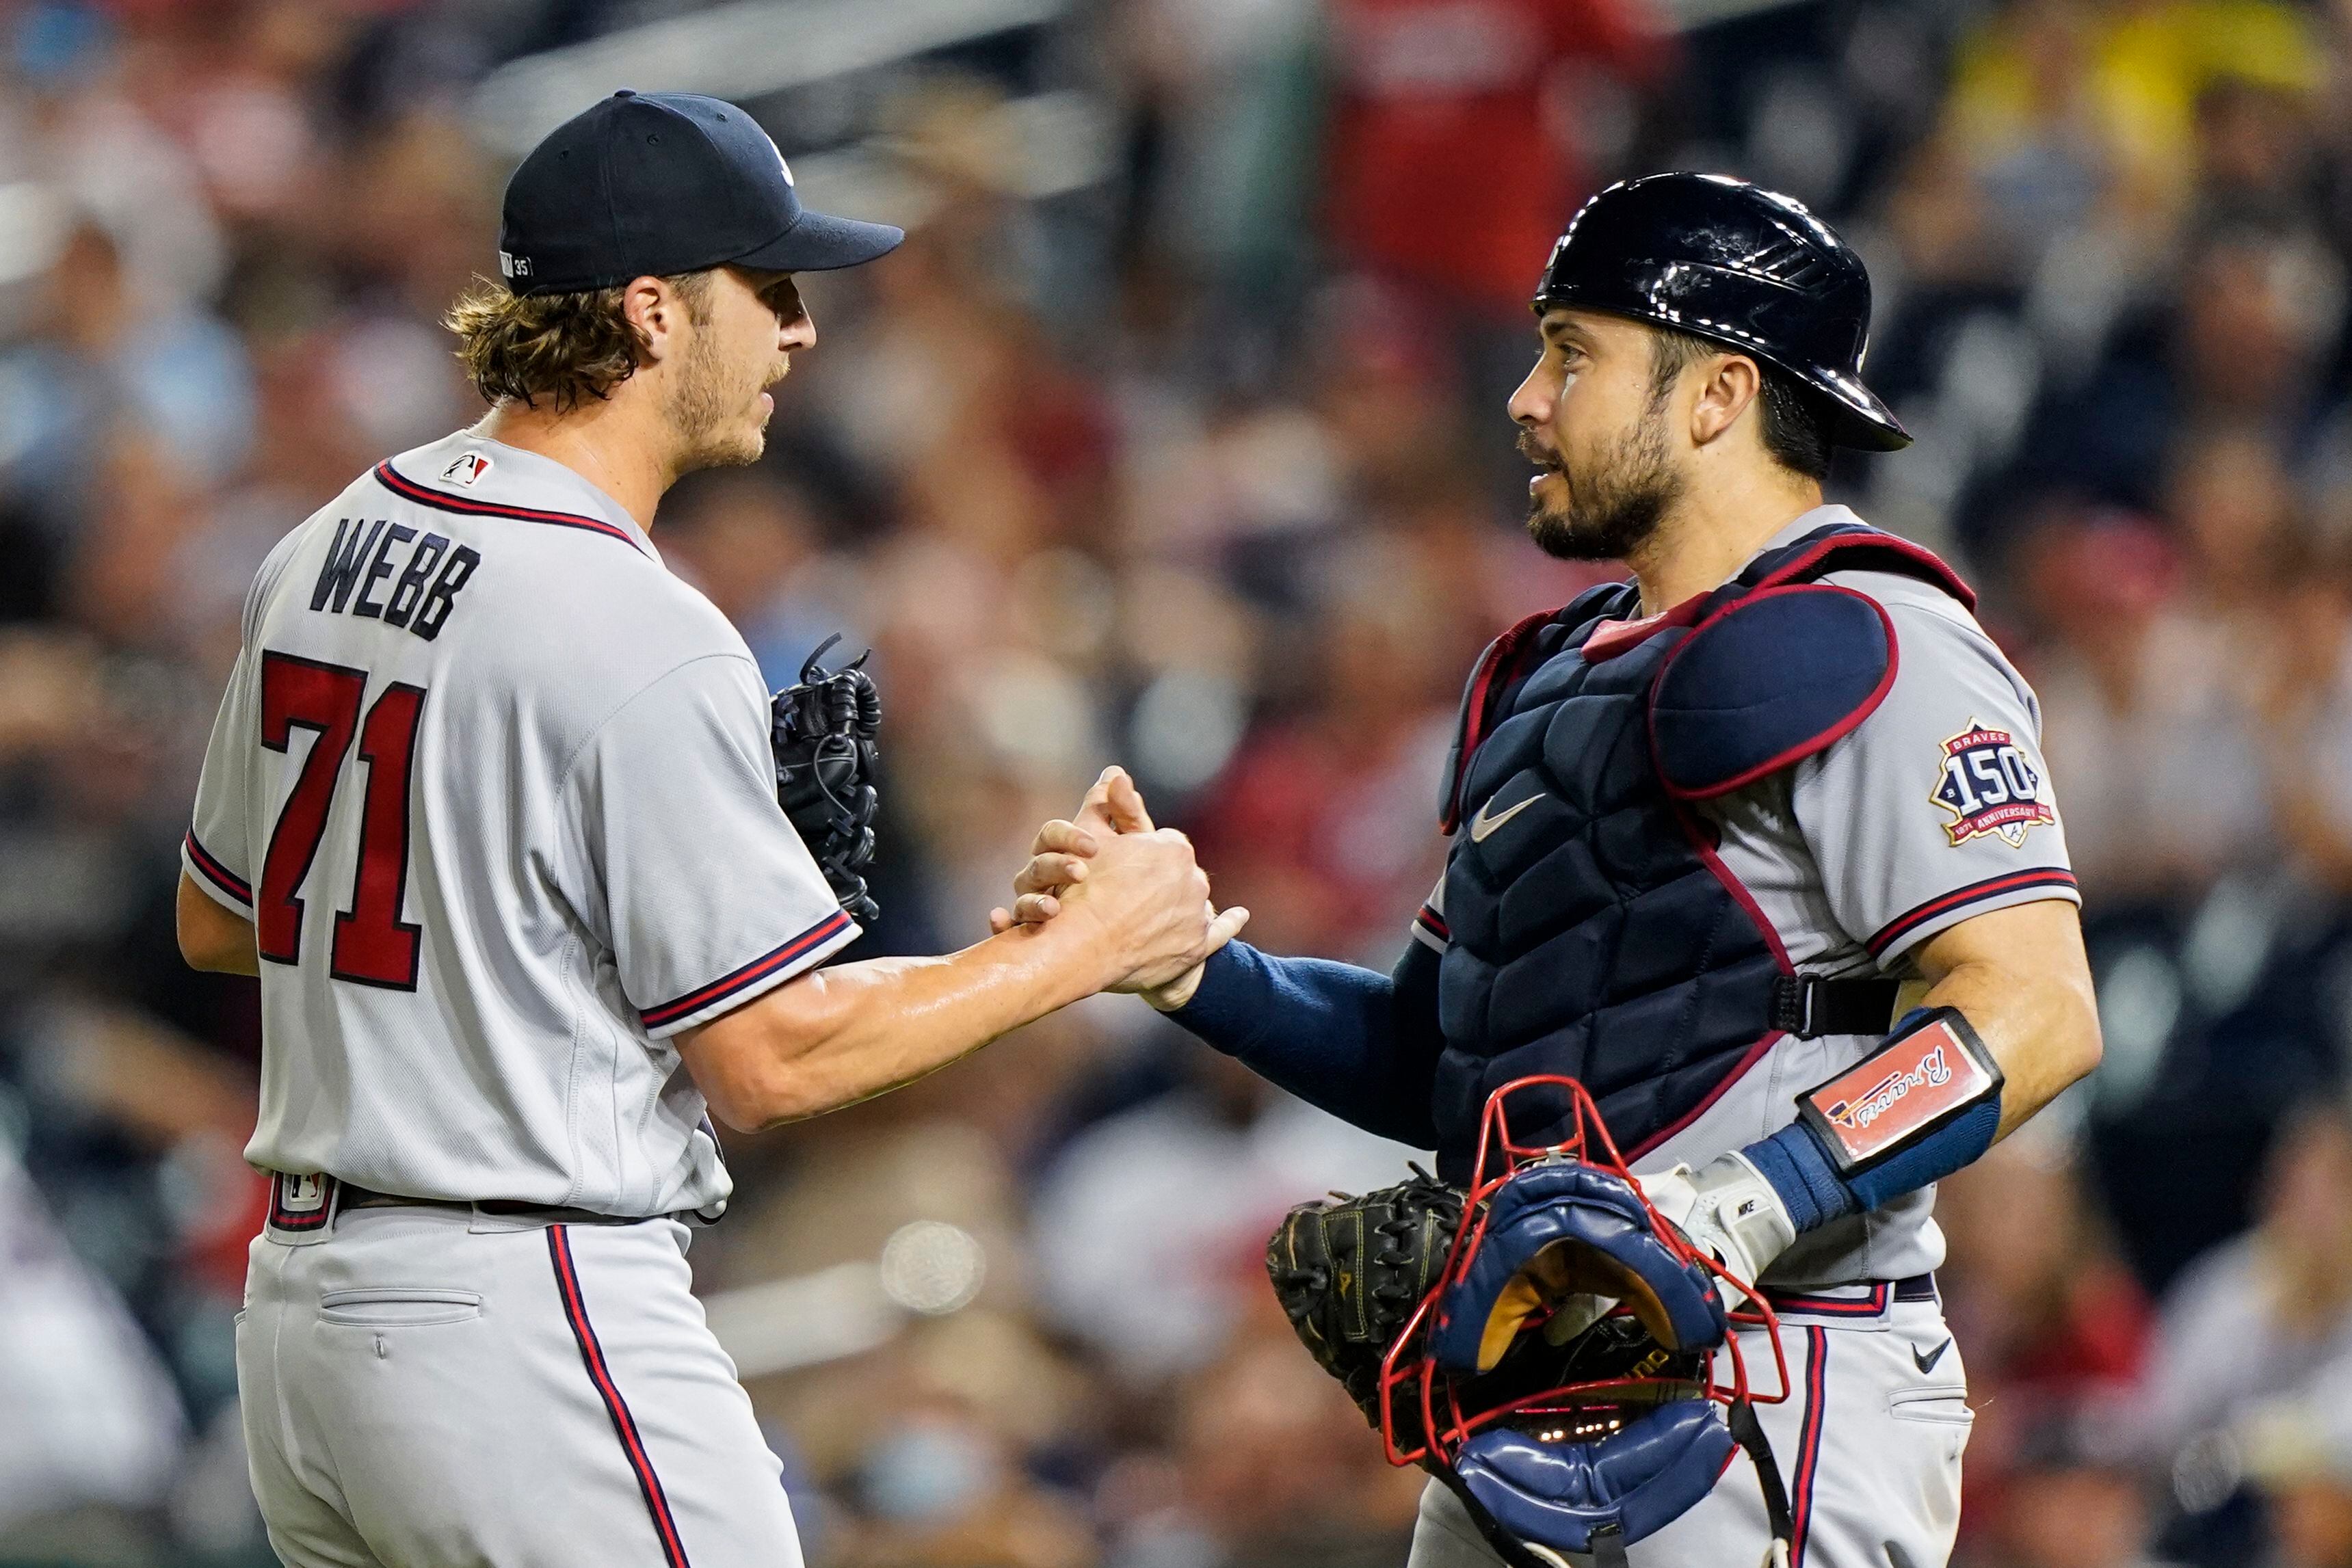 Albies, Swanson power Braves past Nationals 12-2 - The Washington Post